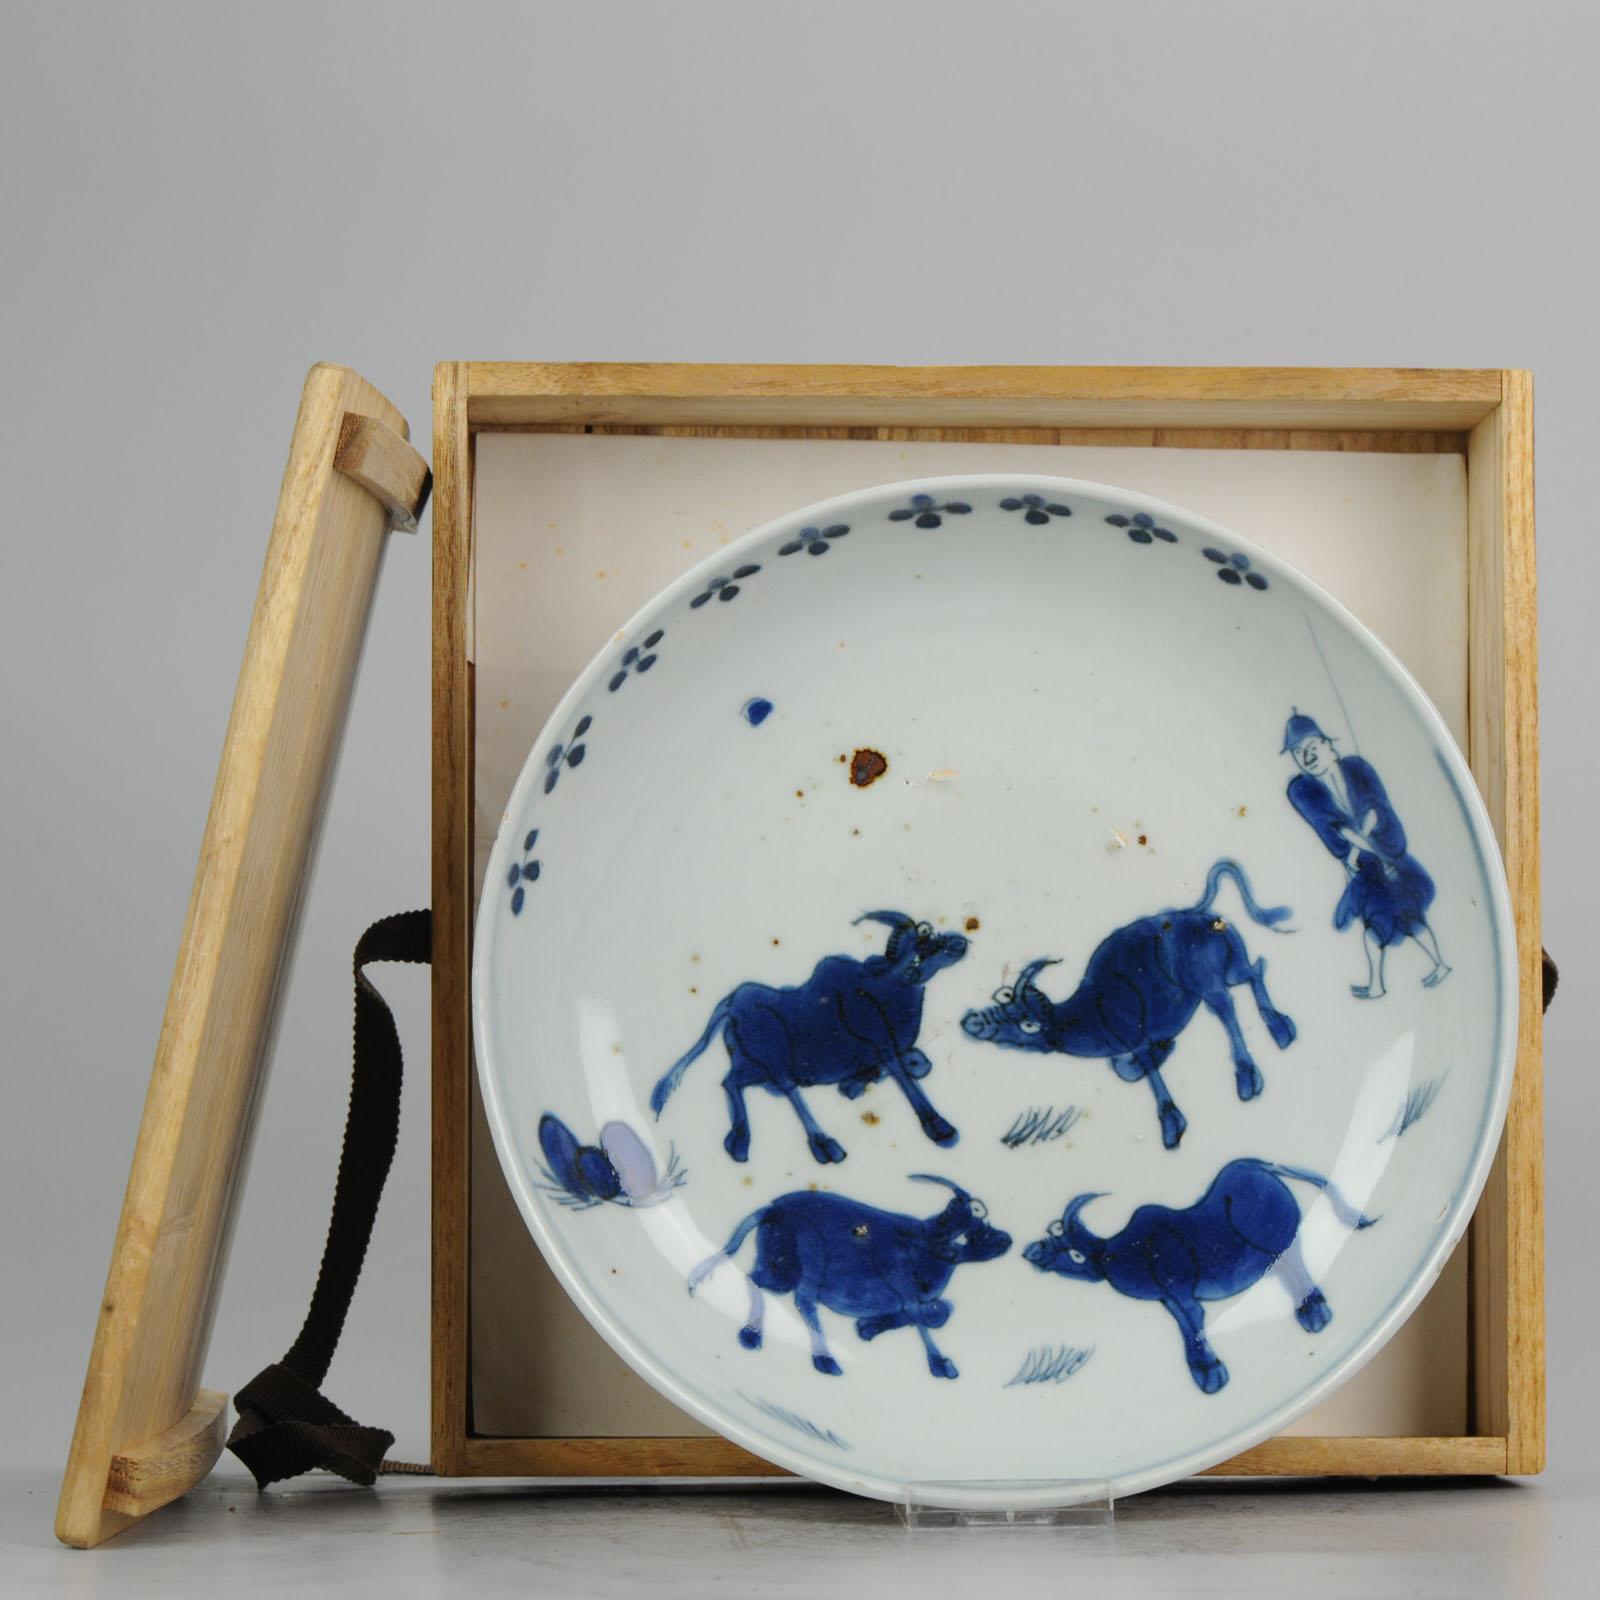 A very nice plate, early 17th century. Cows and Shepperd rare plate!

20-9-19-1-20

See Kosometsuke, Kyoto Shoin

All will be packed neat and sent track and trace airmail with insurance. Packages are always shipped on the next Wednesday.

